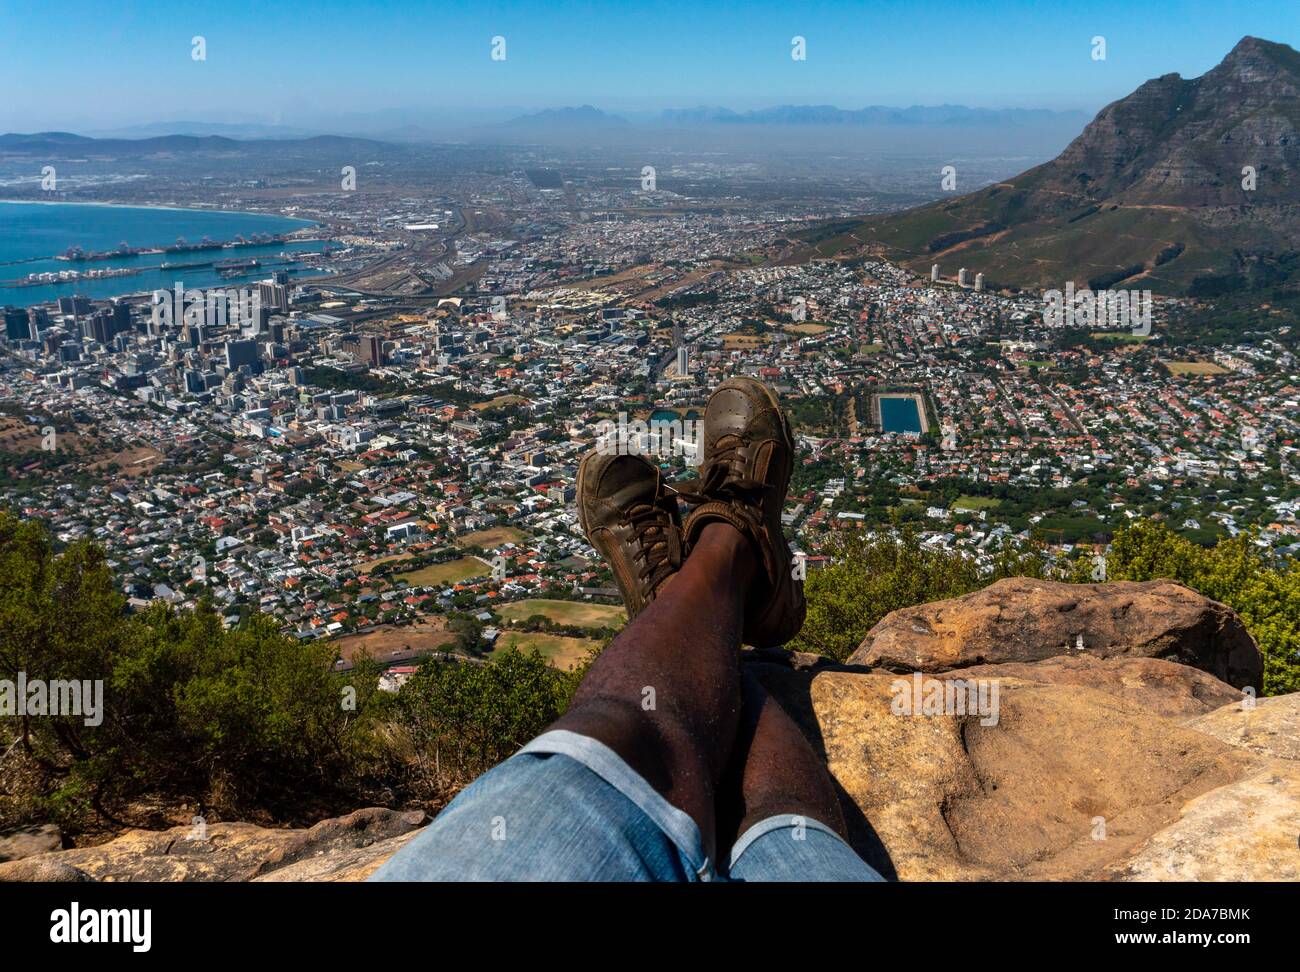 POV of a young hiker Afro American man sitting enjoying a beautiful view of Cape Town from the top of Lion's Head mountain.hiker relaxing Stock Photo